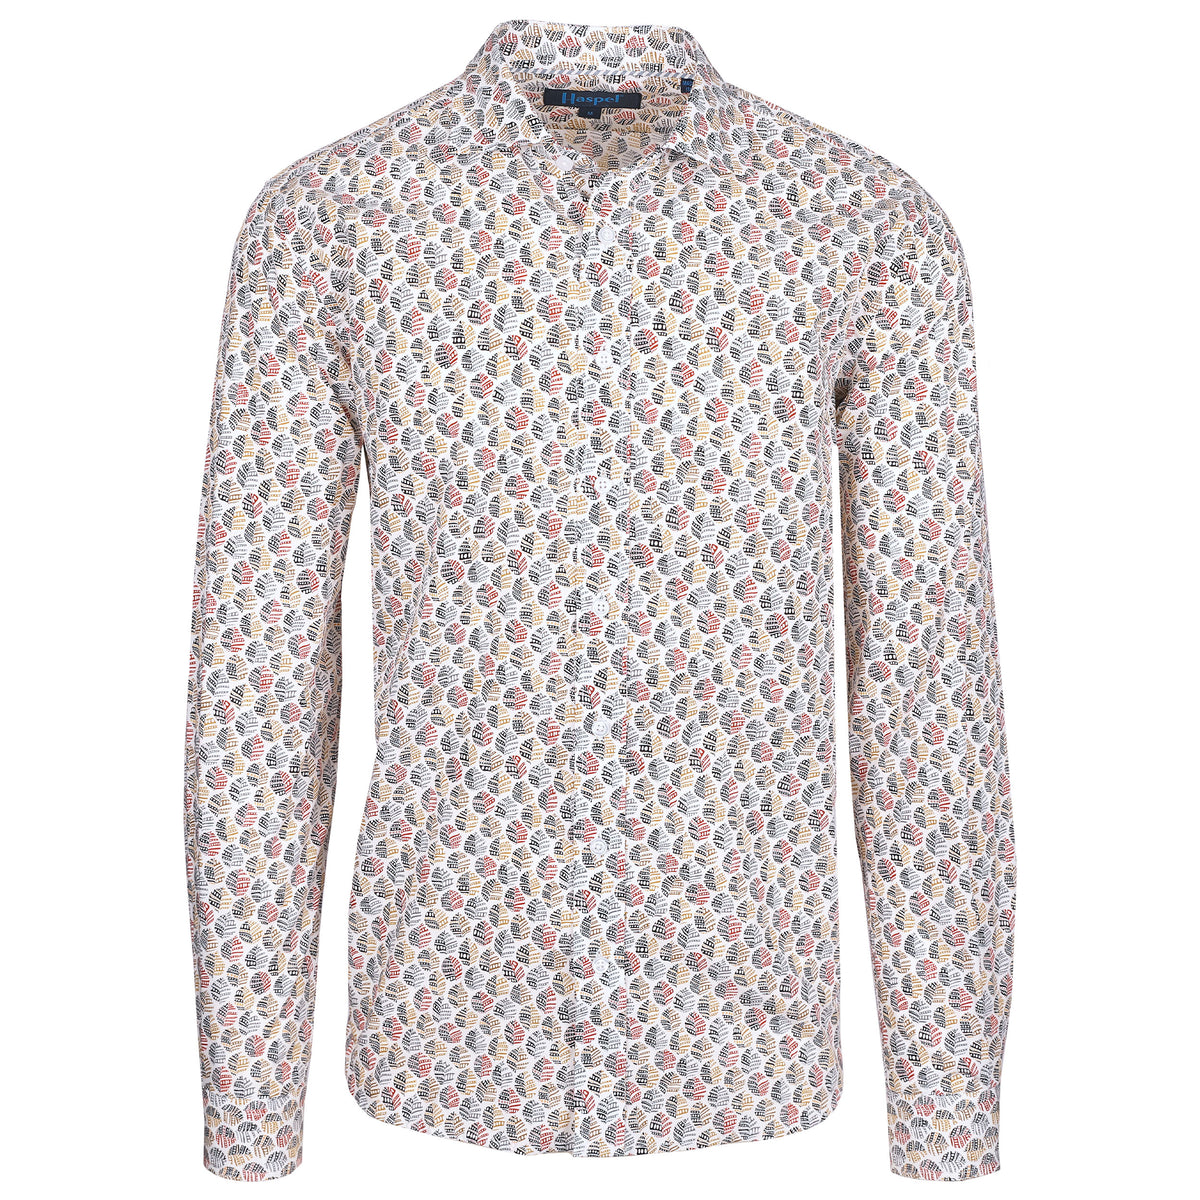 The Carroll Red &amp; BlackPrint Shirt features a daring leaf pattern in vivid reds, blacks, and tans. Featuring striking white buttons, this sport shirt will take you from the office to the outdoors with a fearless look.  100% Cotton • Spread Collar • Long Sleeve • Machine Washable • Made in Italy • Return Policy